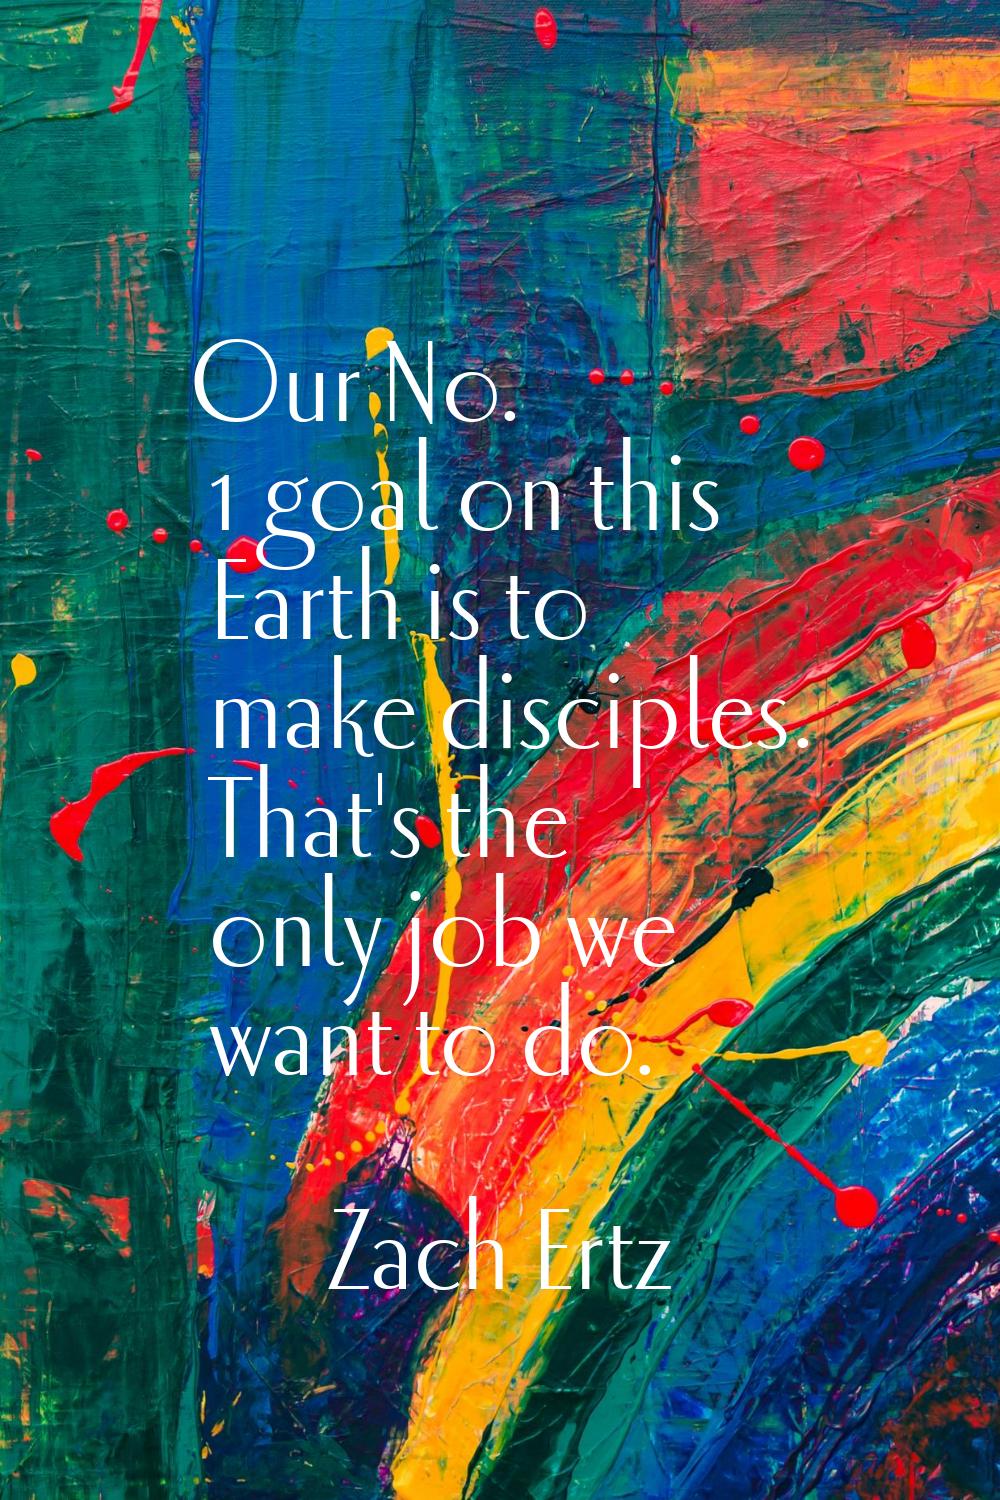 Our No. 1 goal on this Earth is to make disciples. That's the only job we want to do.